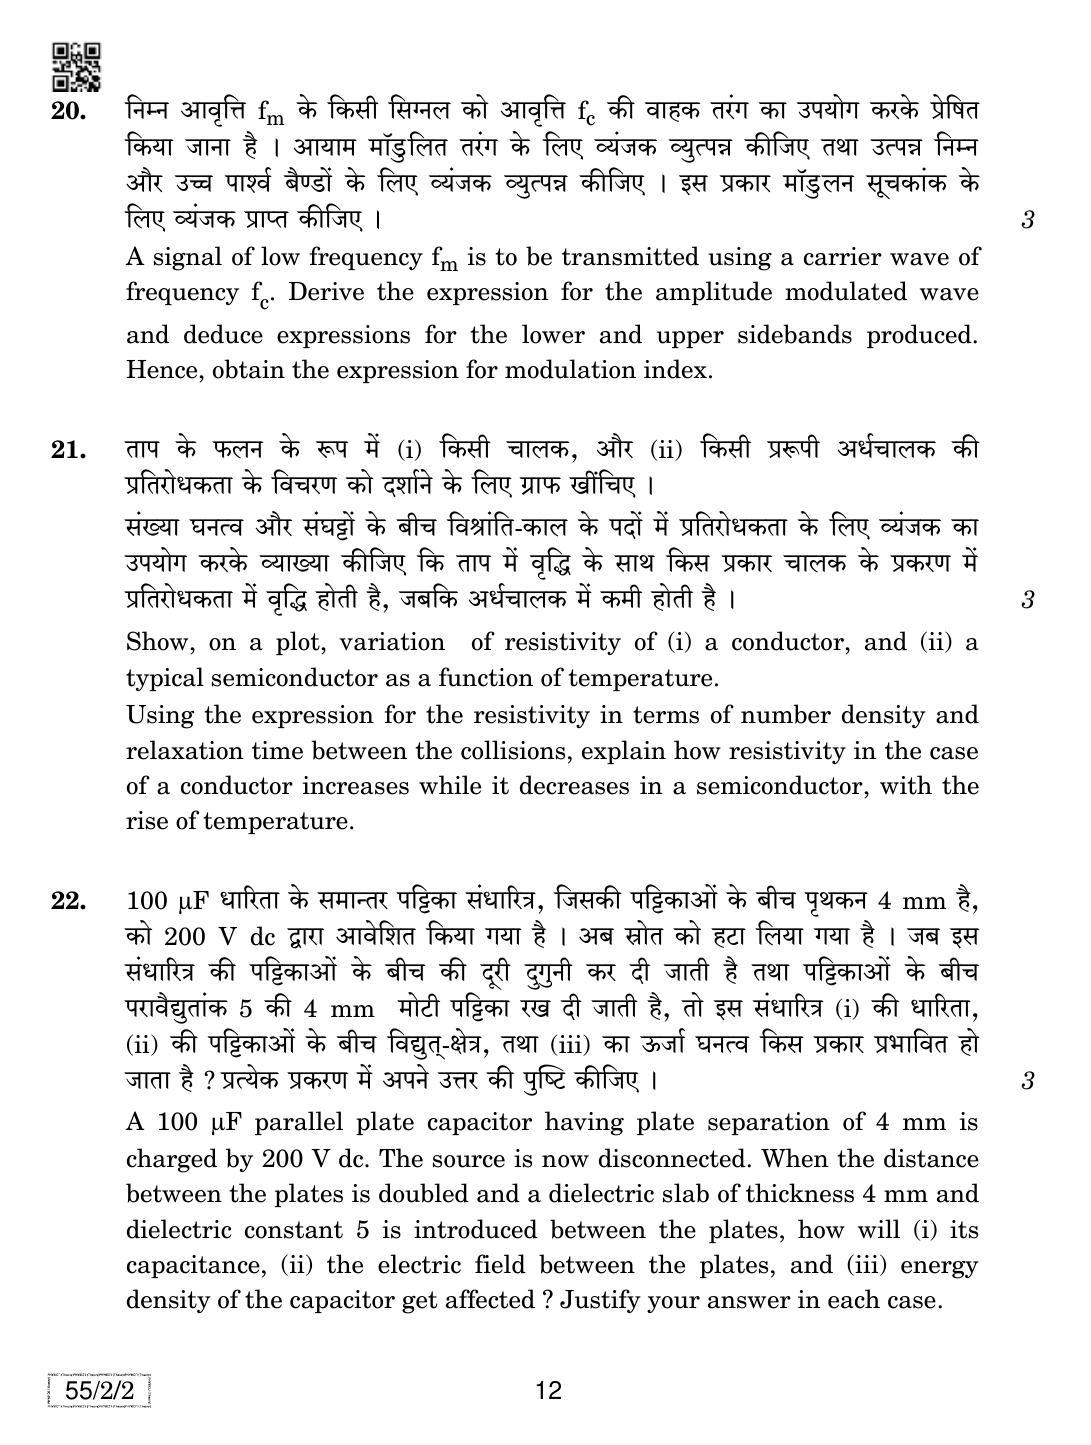 CBSE Class 12 55-2-2 Physics 2019 Question Paper - Page 12